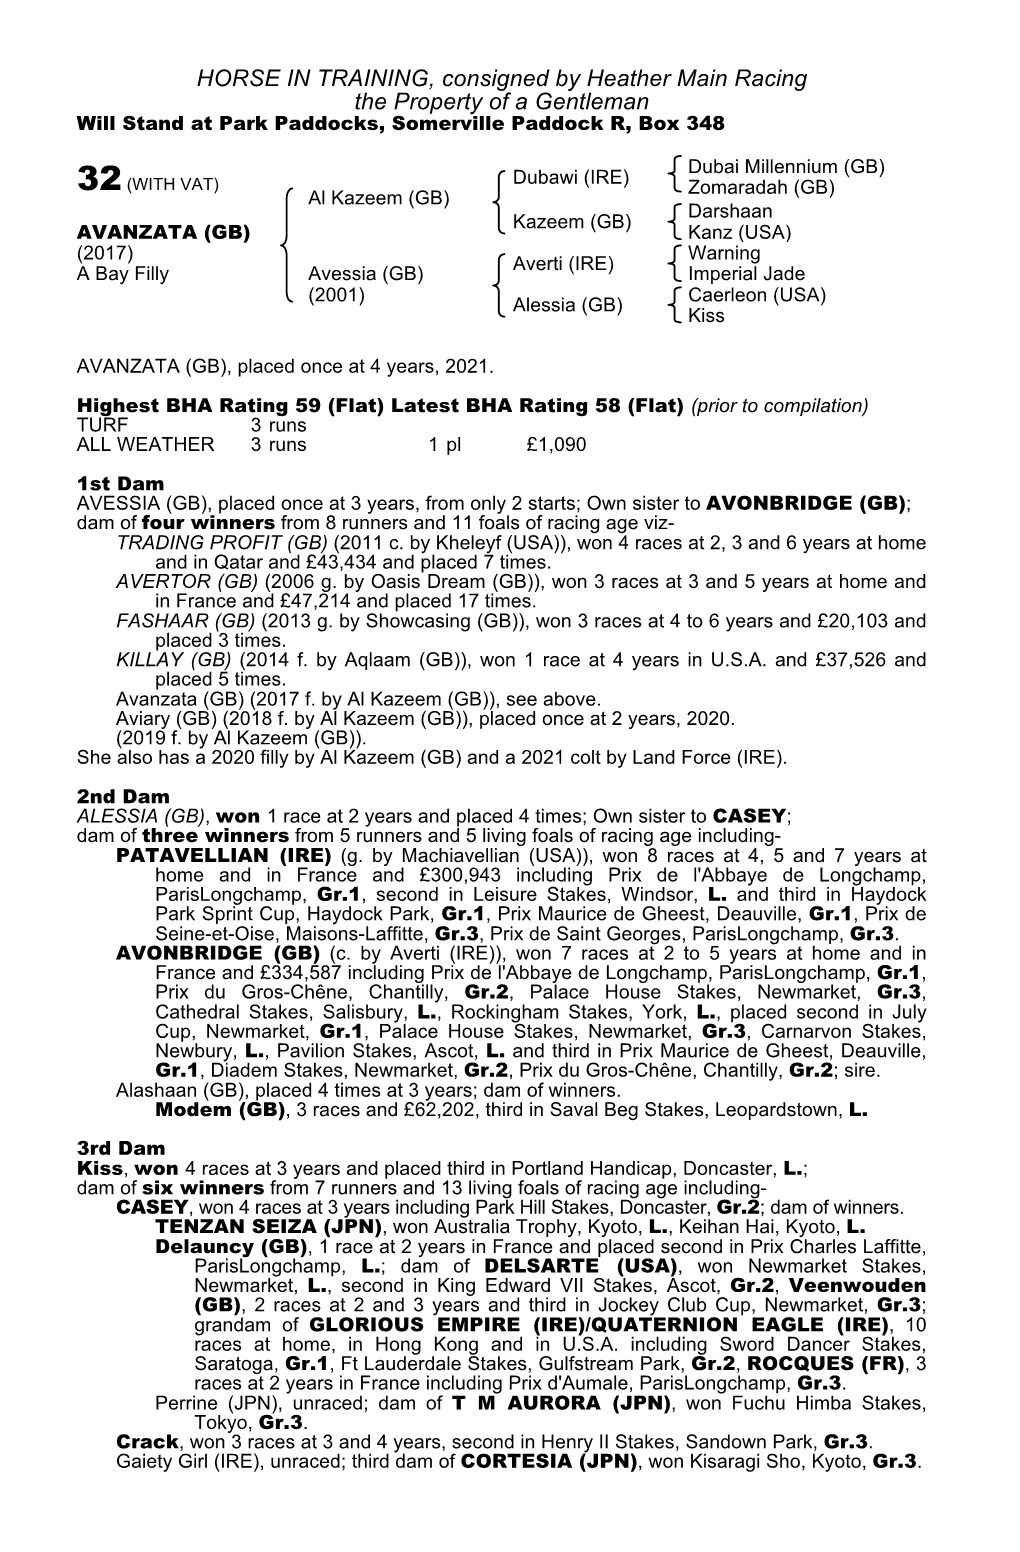 HORSE in TRAINING, Consigned by Heather Main Racing the Property of a Gentleman Will Stand at Park Paddocks, Somerville Paddock R, Box 348